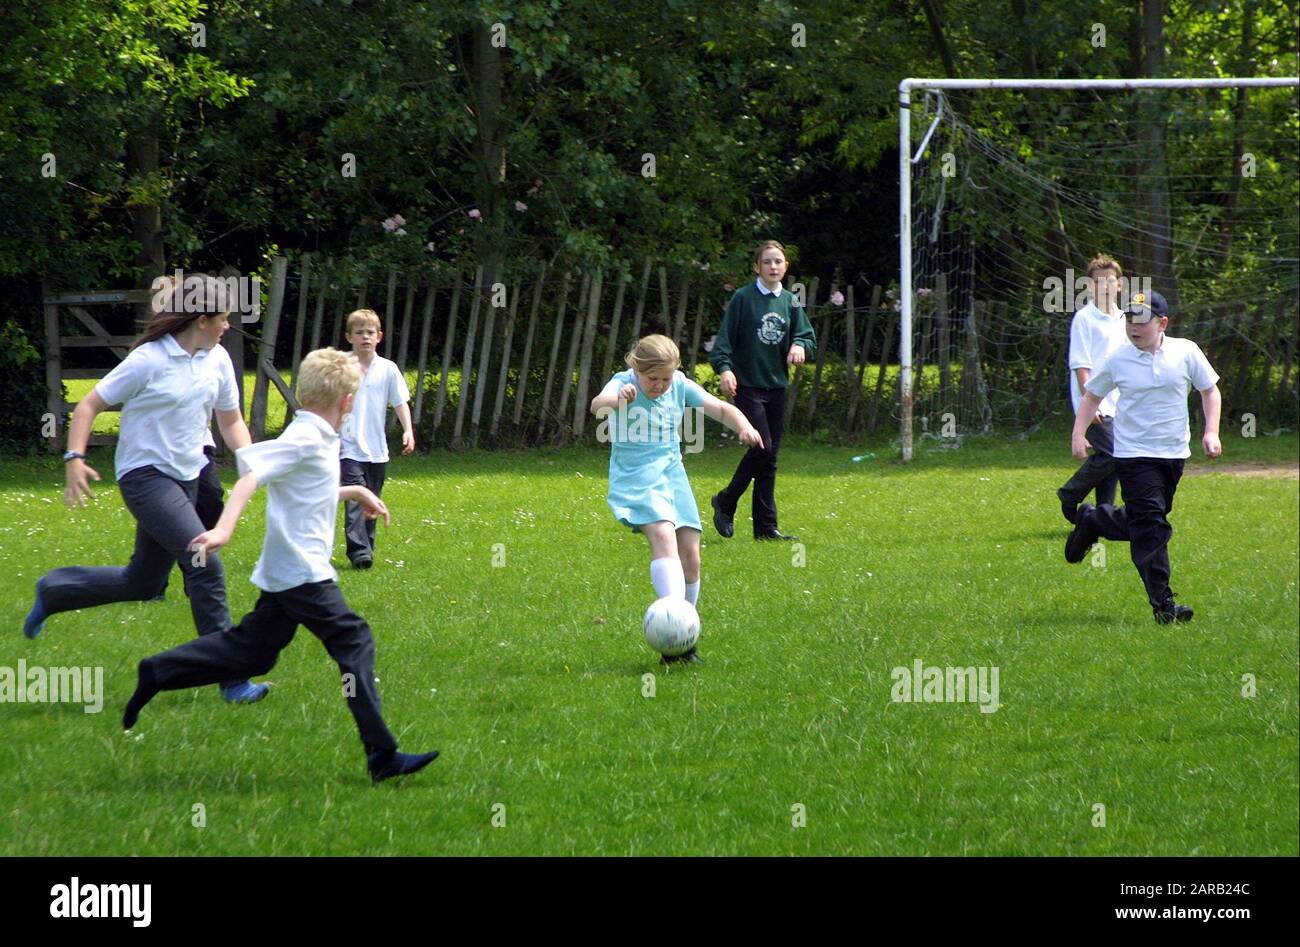 Mixed group of boys and girls playing soccer in the school yard Stock Photo